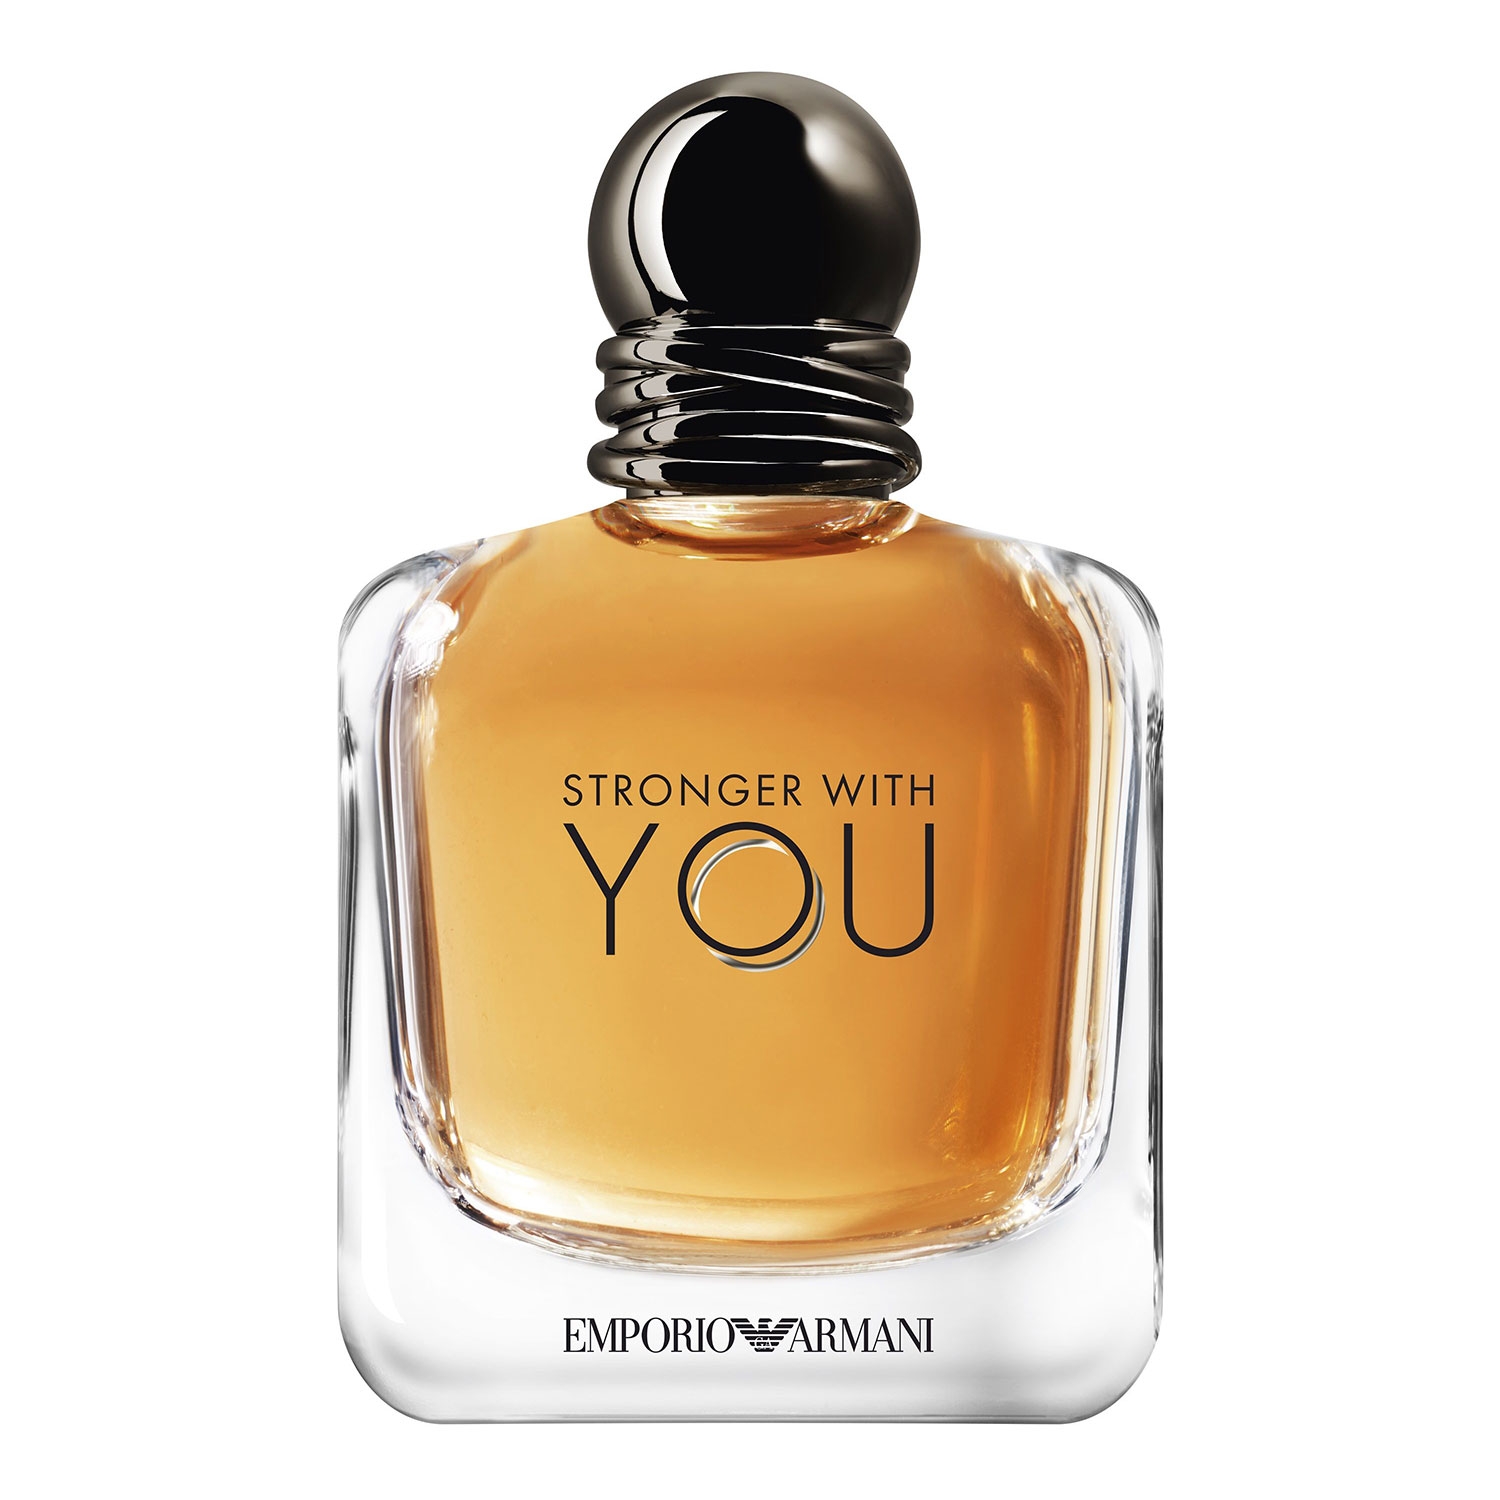 Product image from Emporio Armani - Stronger With You Eau de Toilette